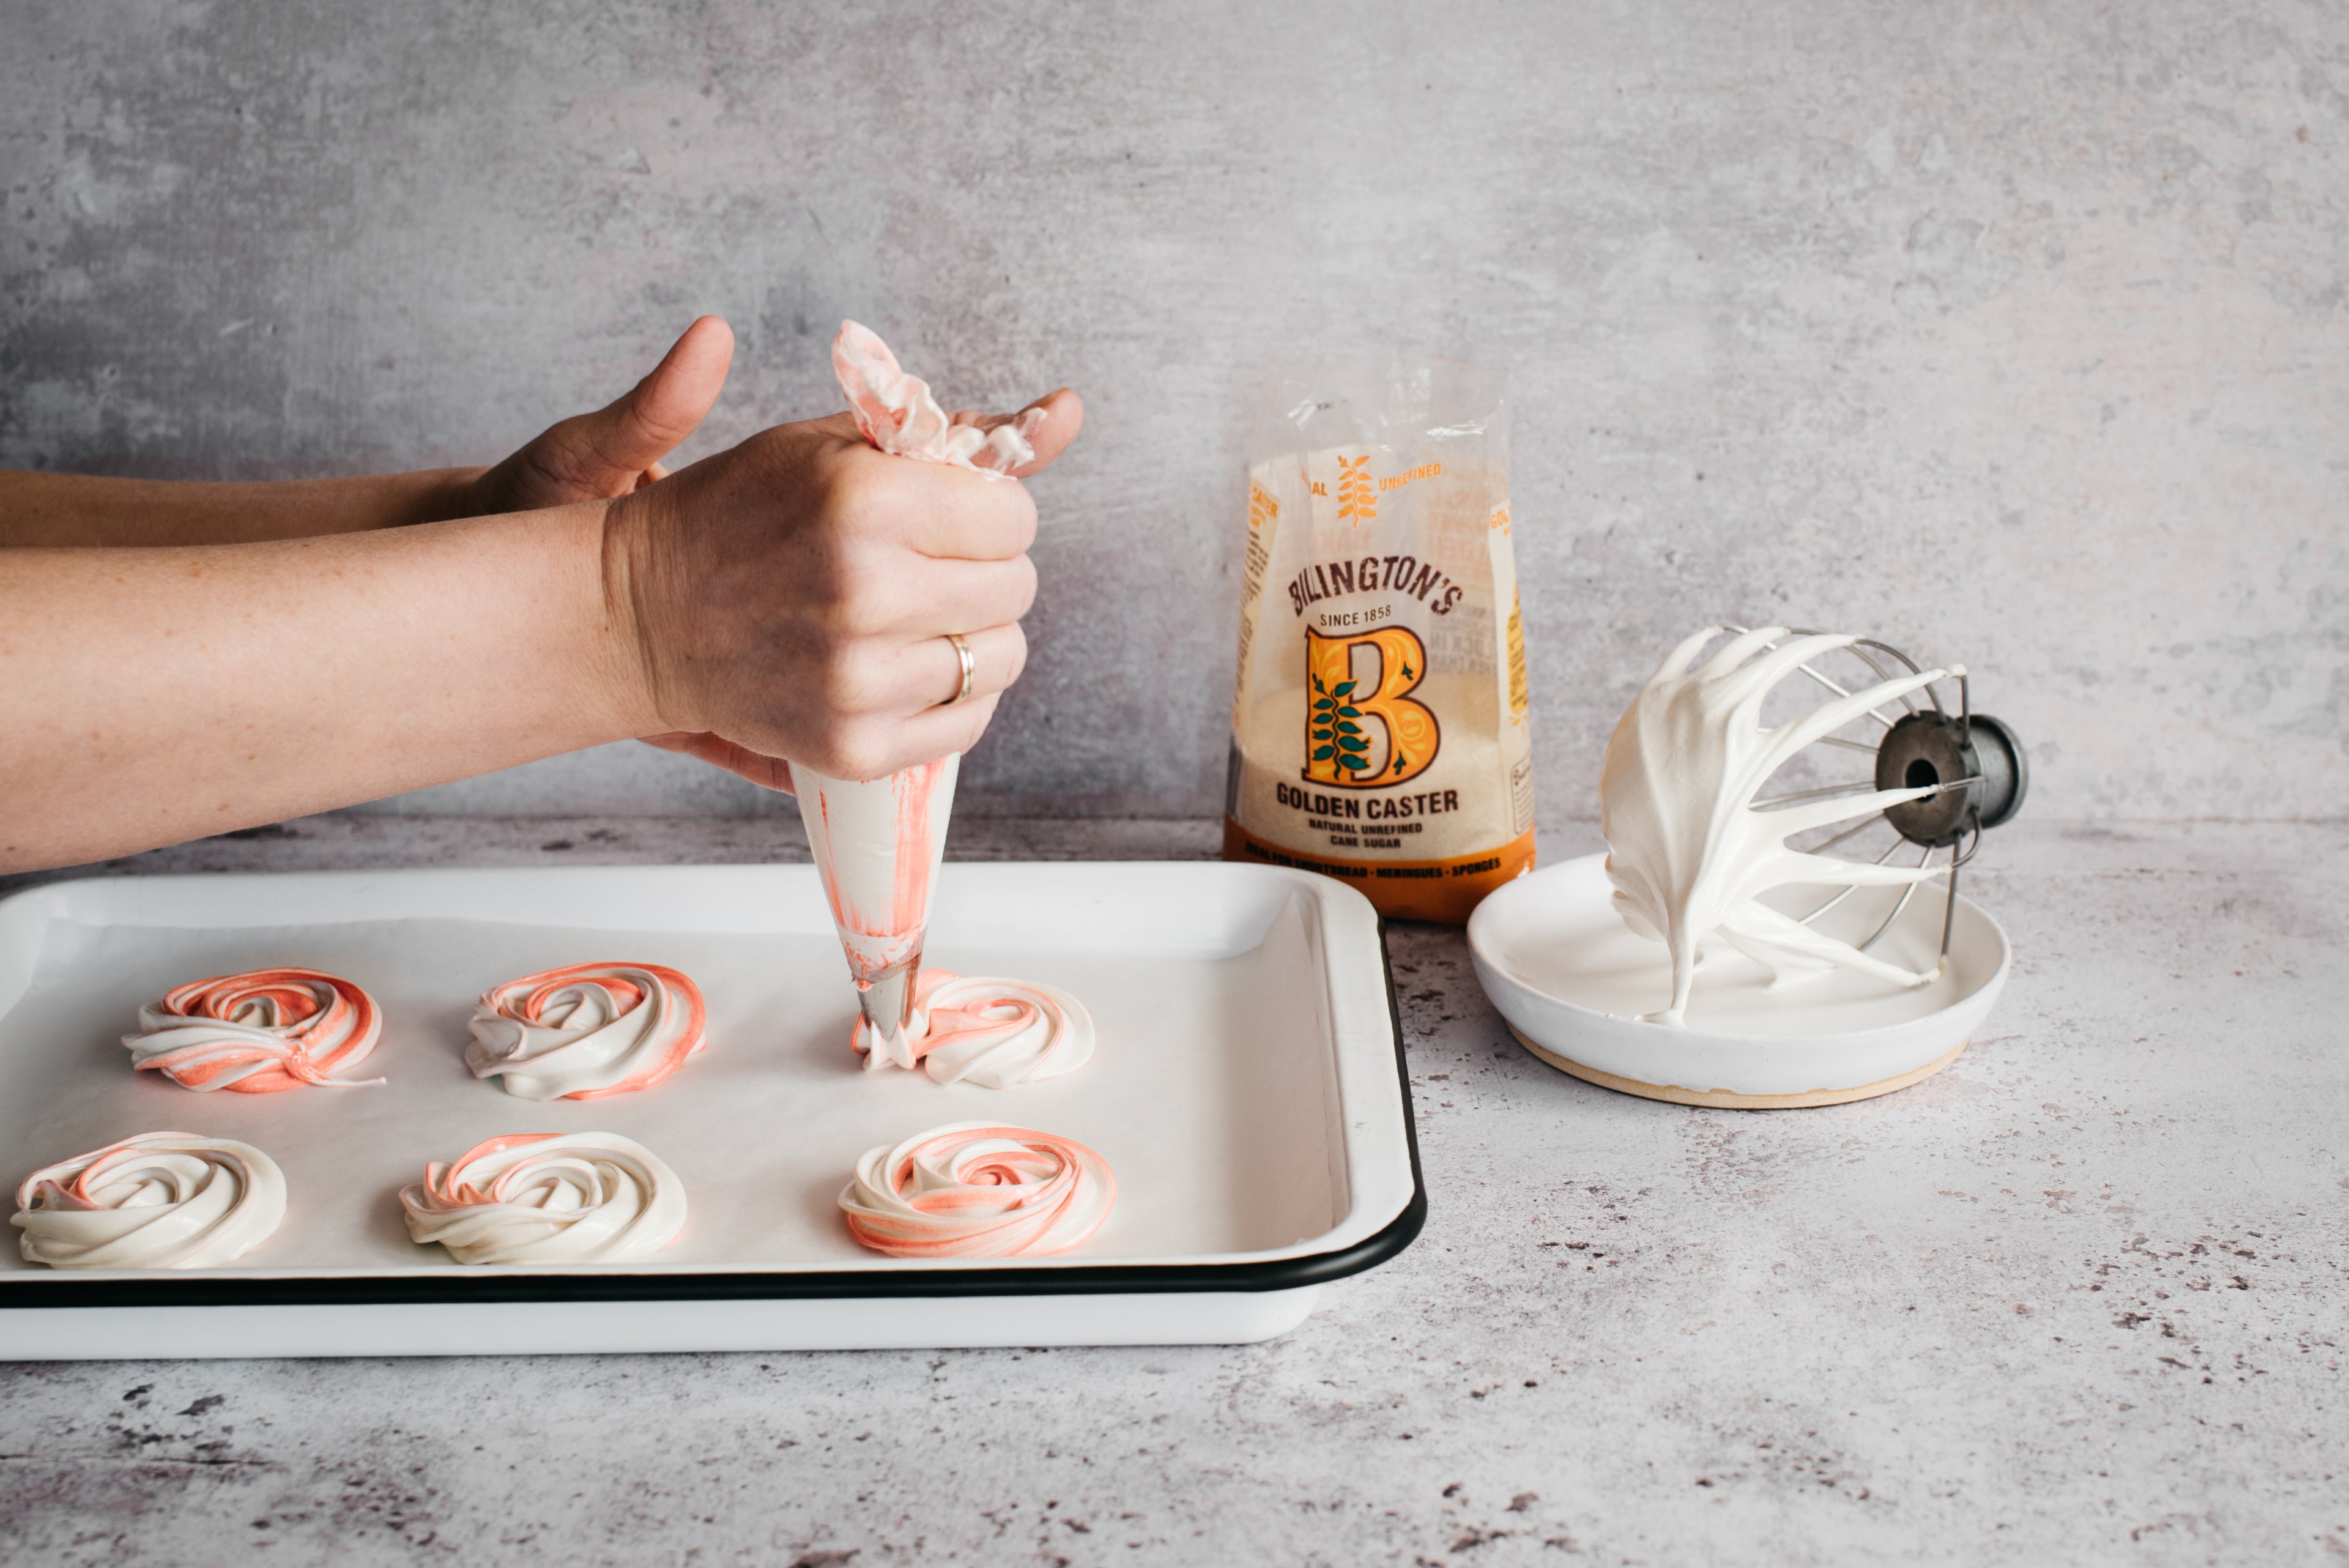 Hand holding a piping bag, piping Vegan Meringue on a baking tray next to a bag of Billington's Golden Caster Sugar